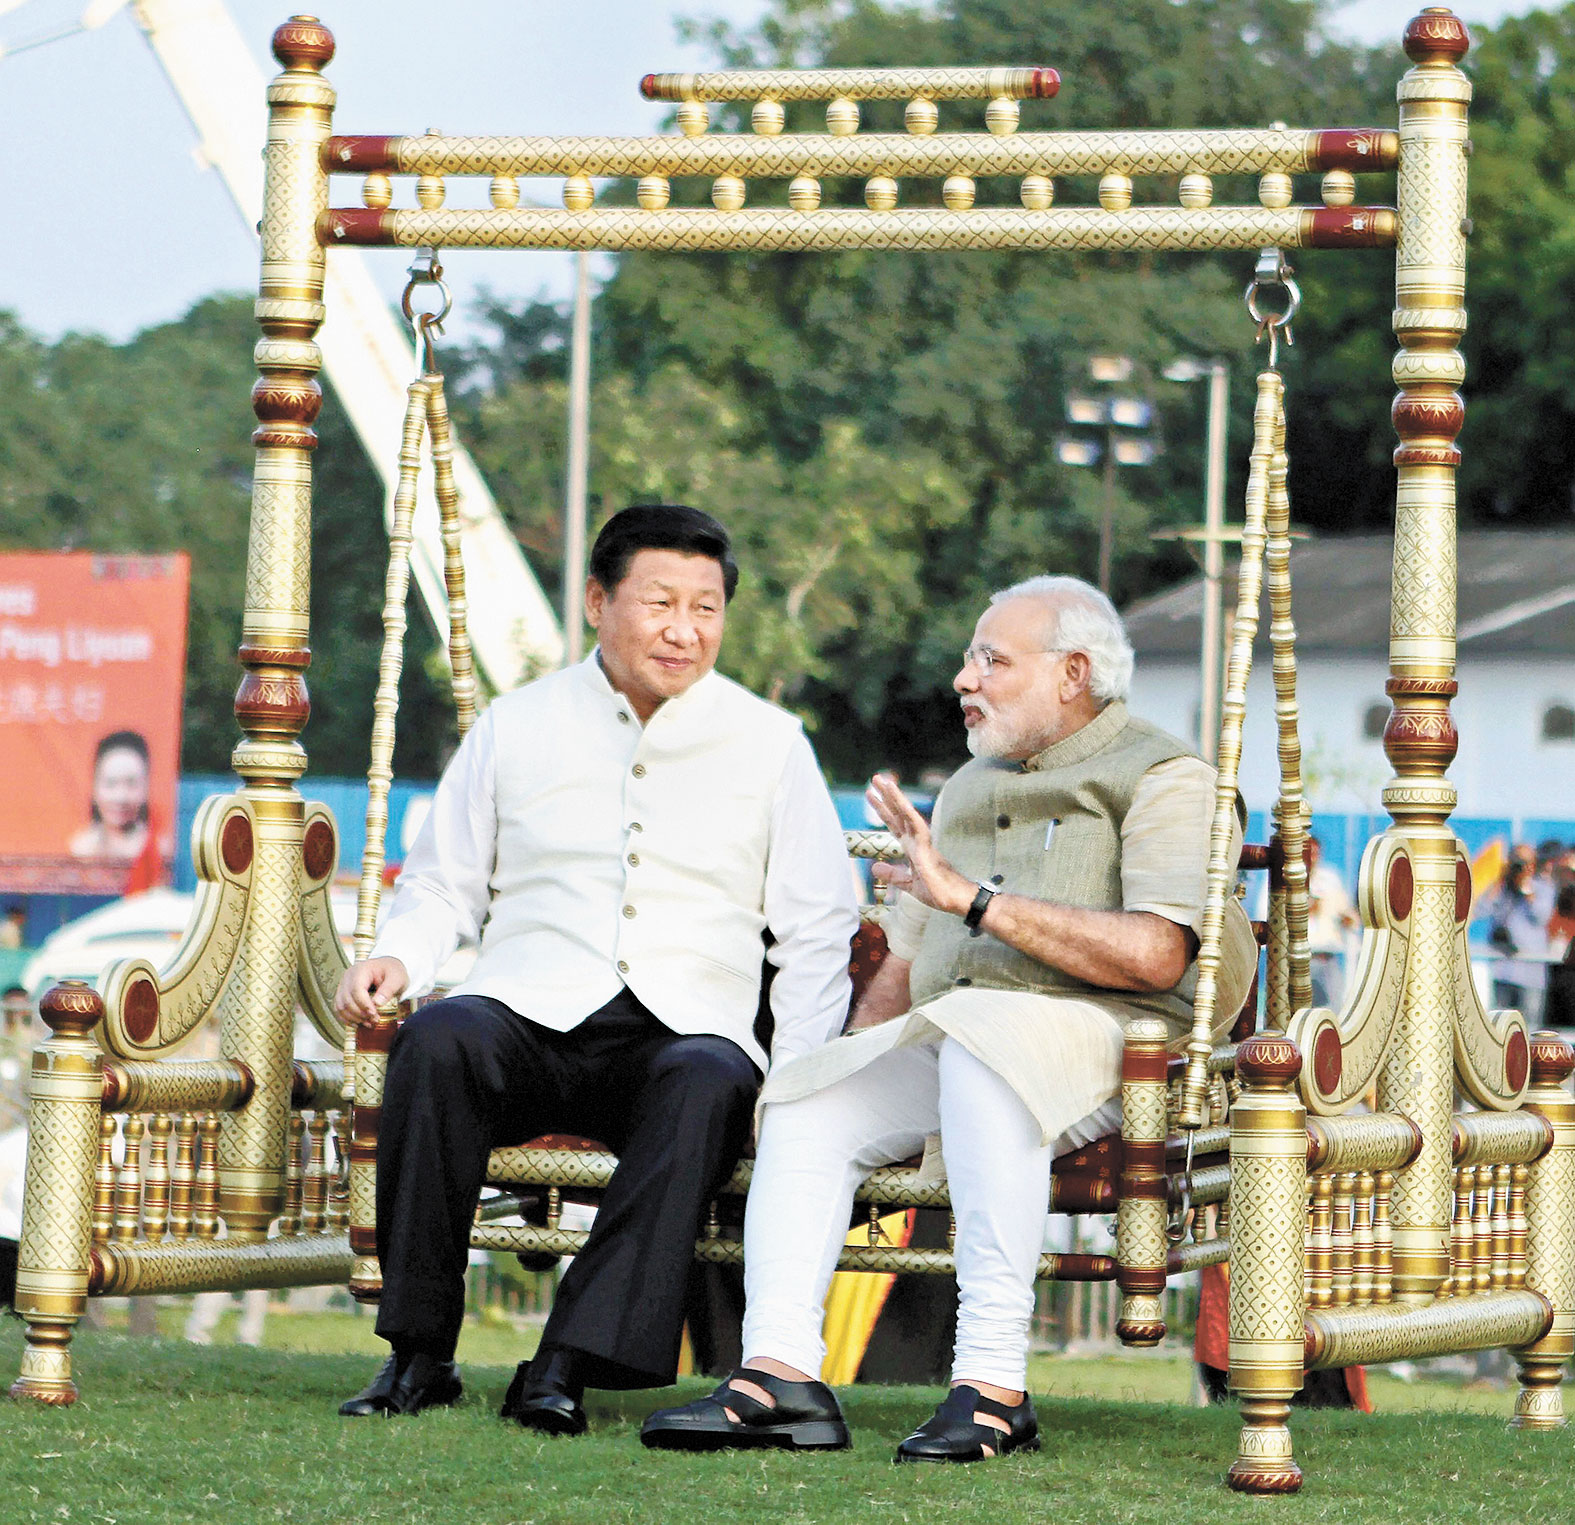 President Xi Jinping and Prime Minister Narendra Modi on a swing in Ahmedabad in 2014. 